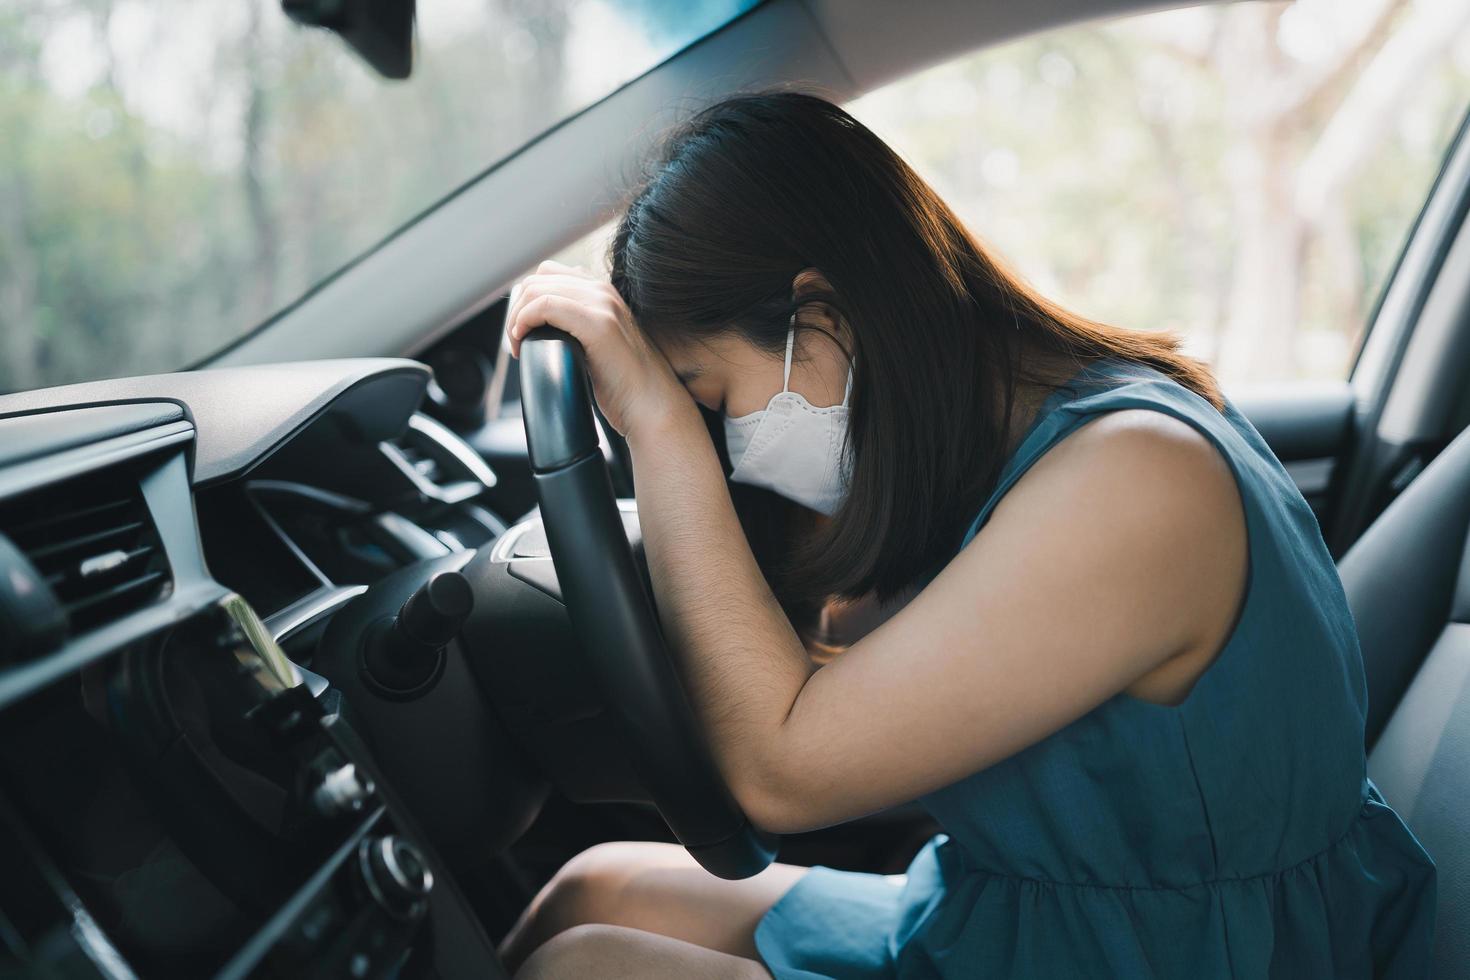 Asian woman napping in her car caused of tired from workload or feeling sleepy. Woman driver feeling sleepy or dizzy while driving she is napping in a car. Transportation concept. photo